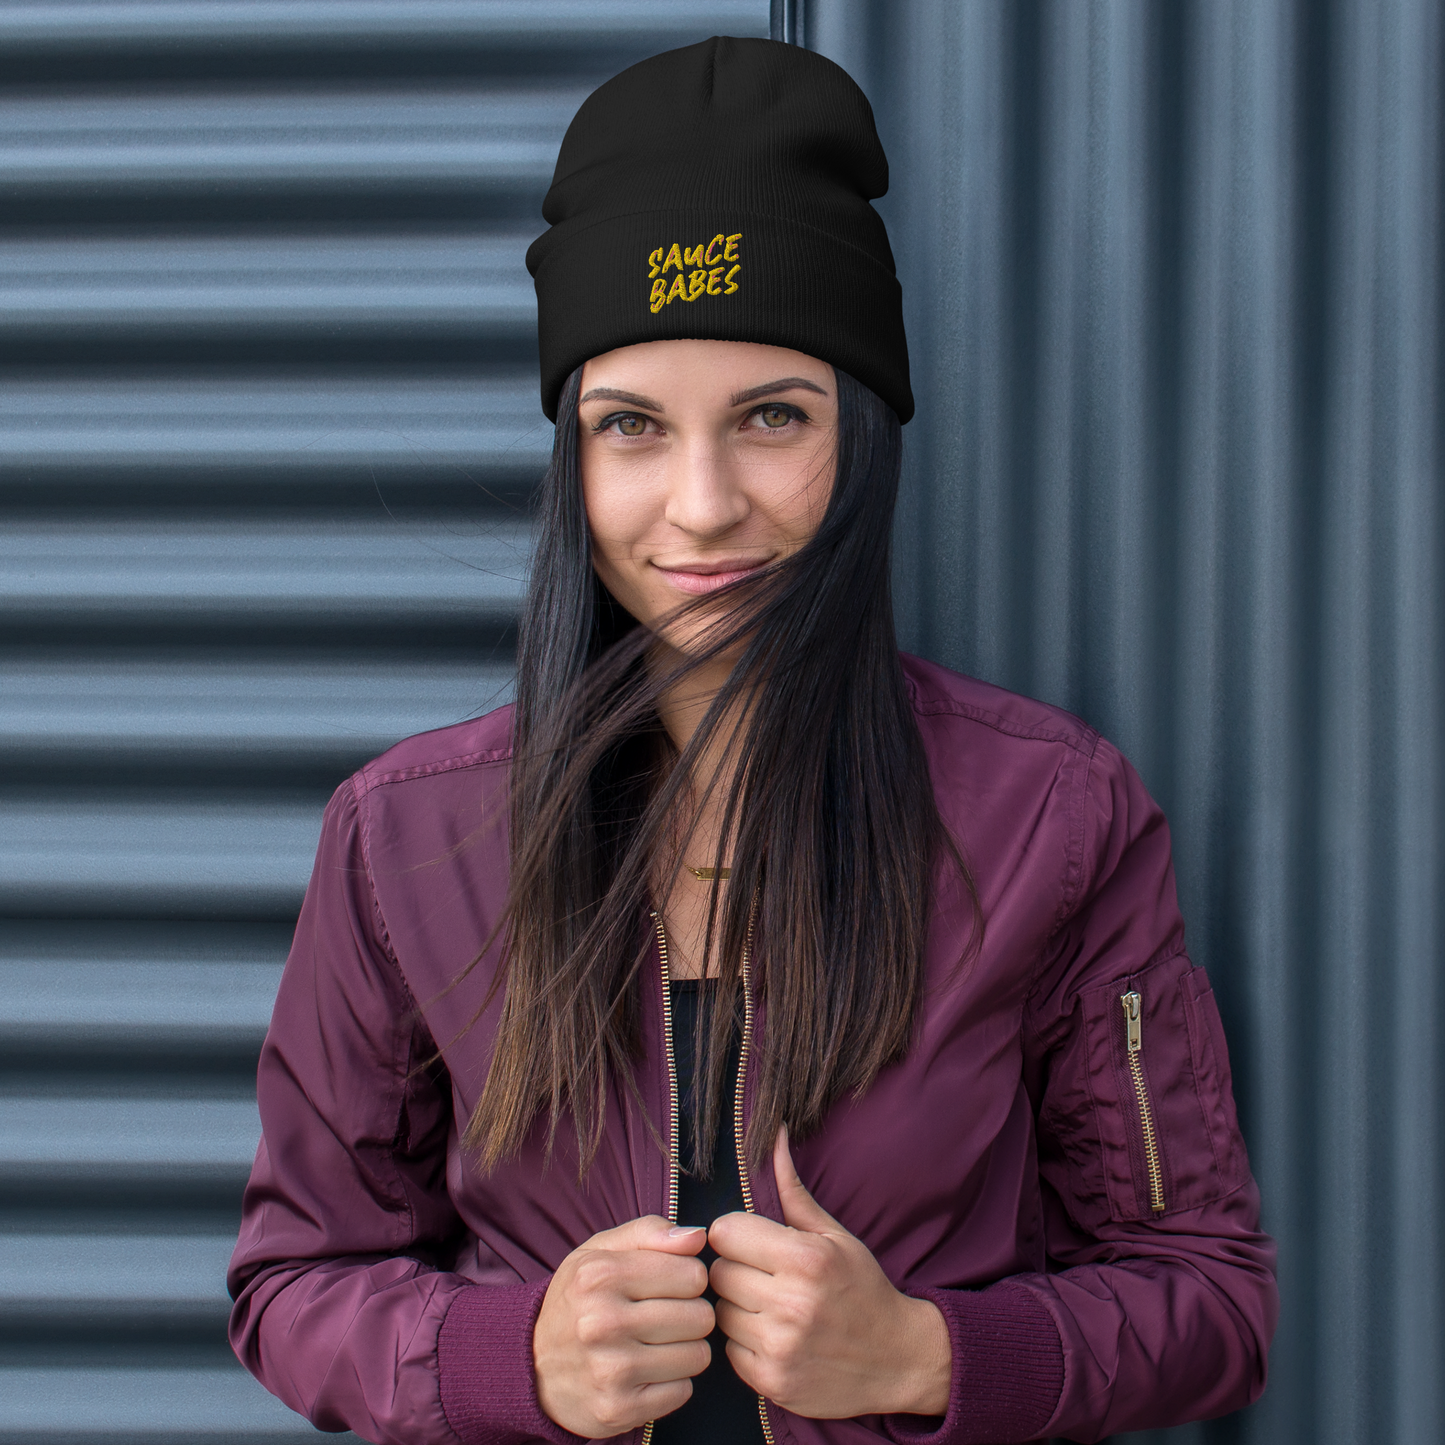 Embroidered Sauce Babes Beanie